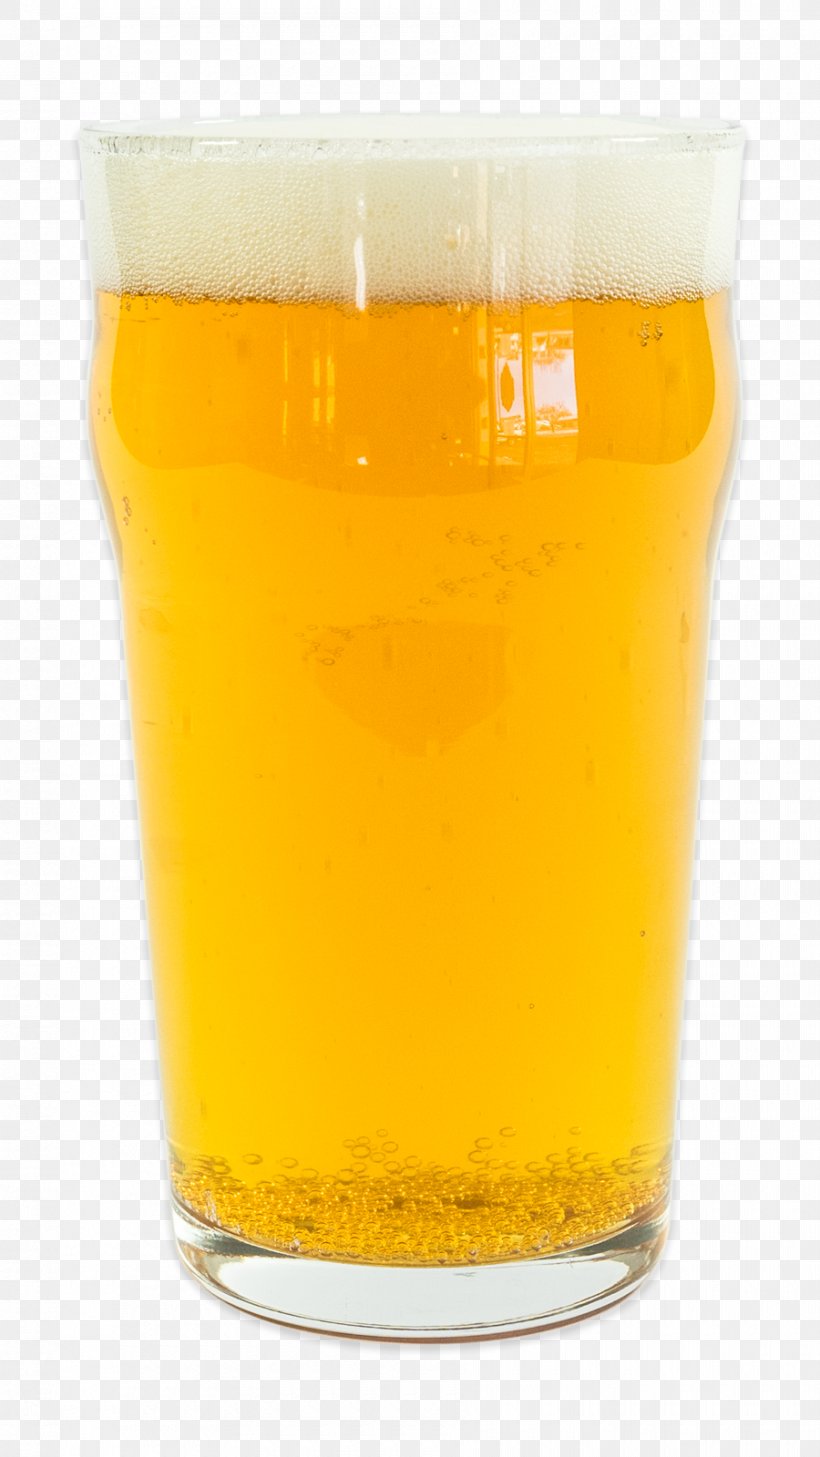 Beer Cider Pint Glass Imperial Pint Non-alcoholic Drink, PNG, 900x1600px, Beer, Beer Glass, Beer Glasses, Brewery, Cider Download Free